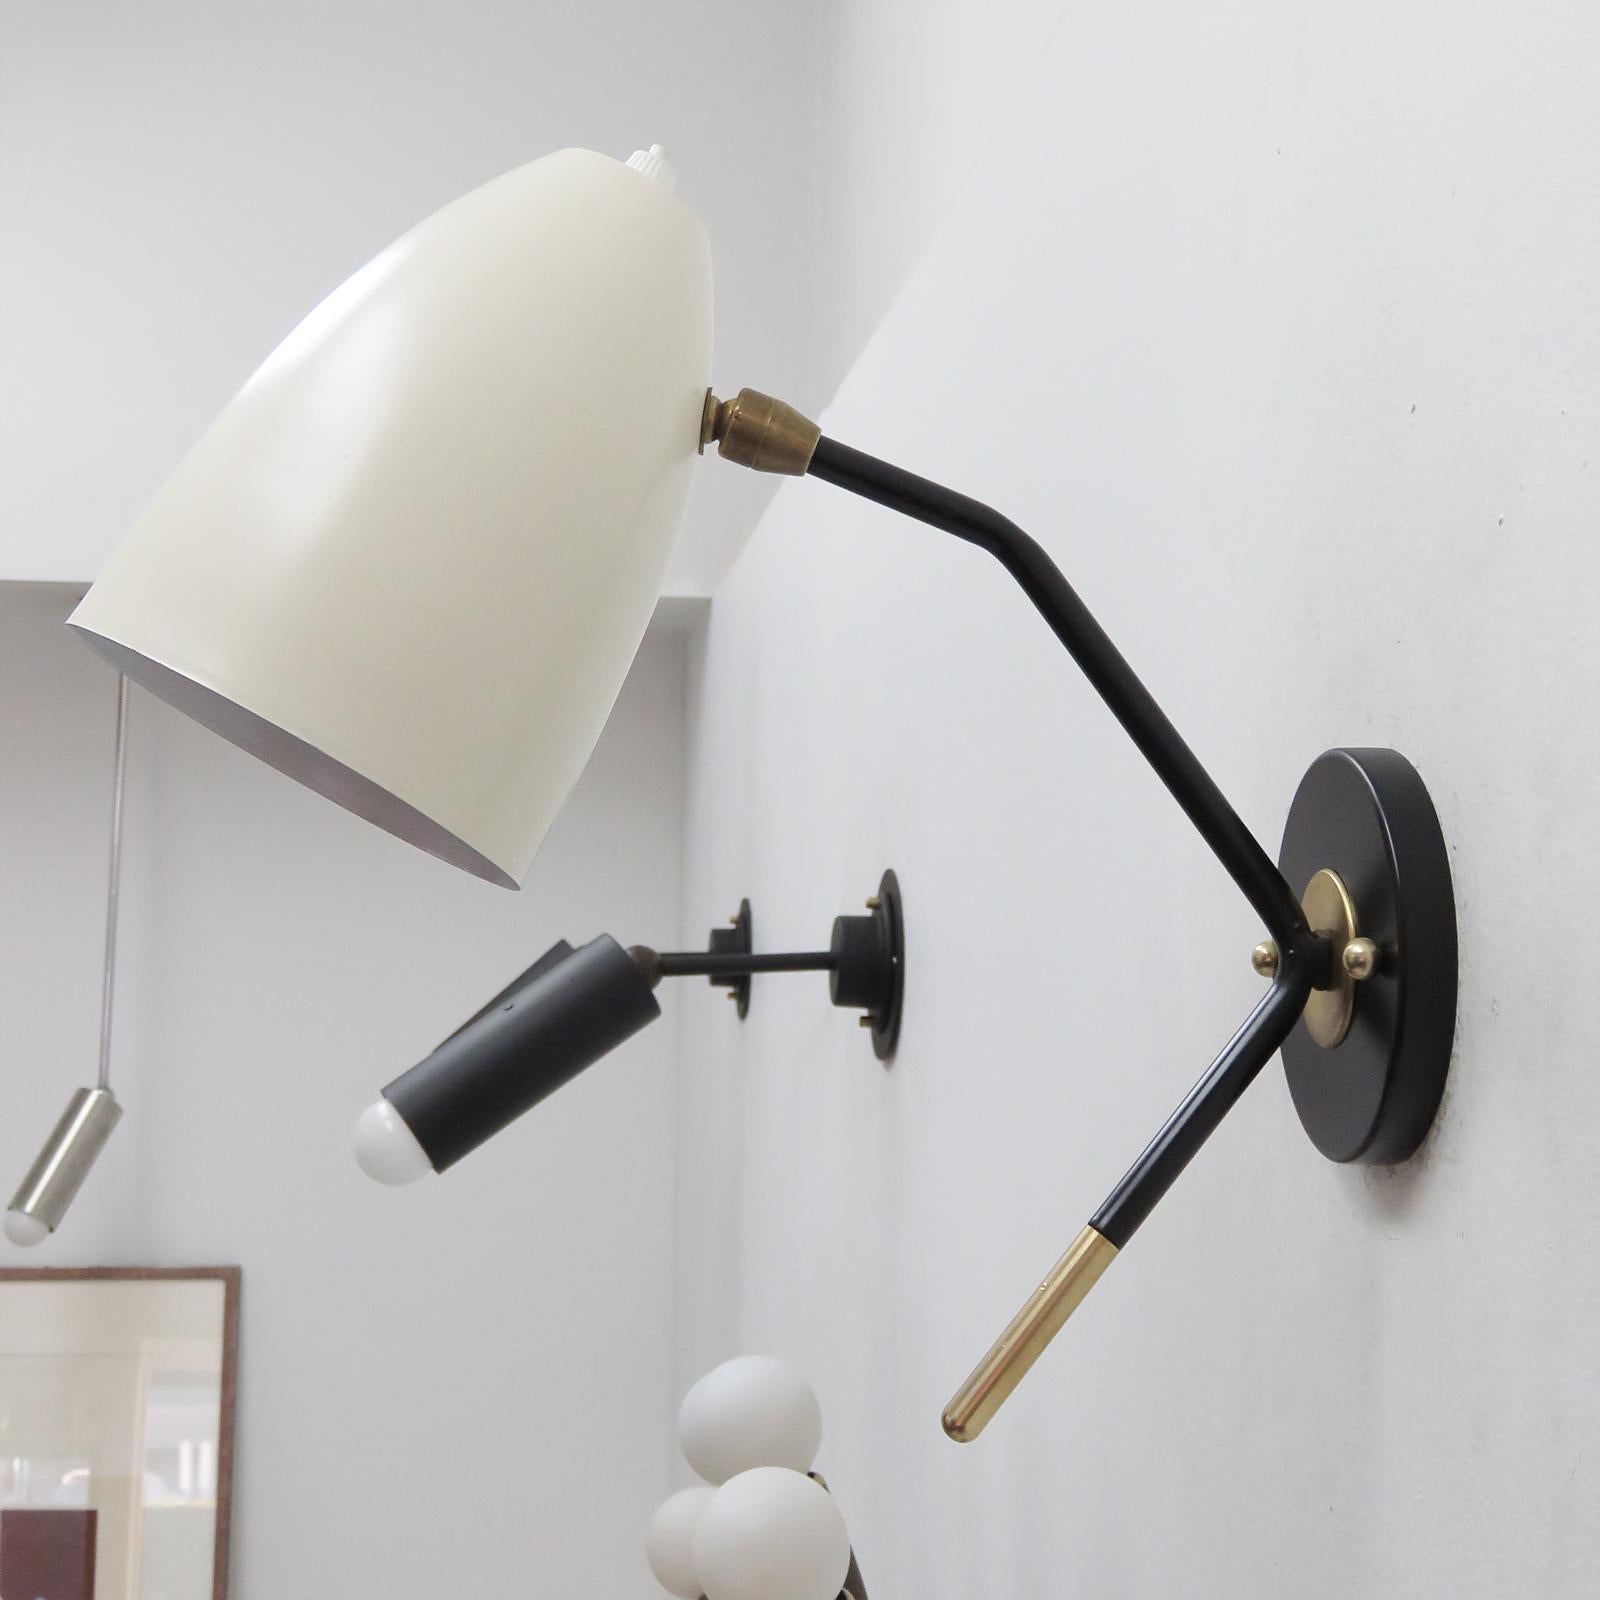 Brass Shell Wall Lights By Gallery L7 - 6 For Sale on 1stDibs